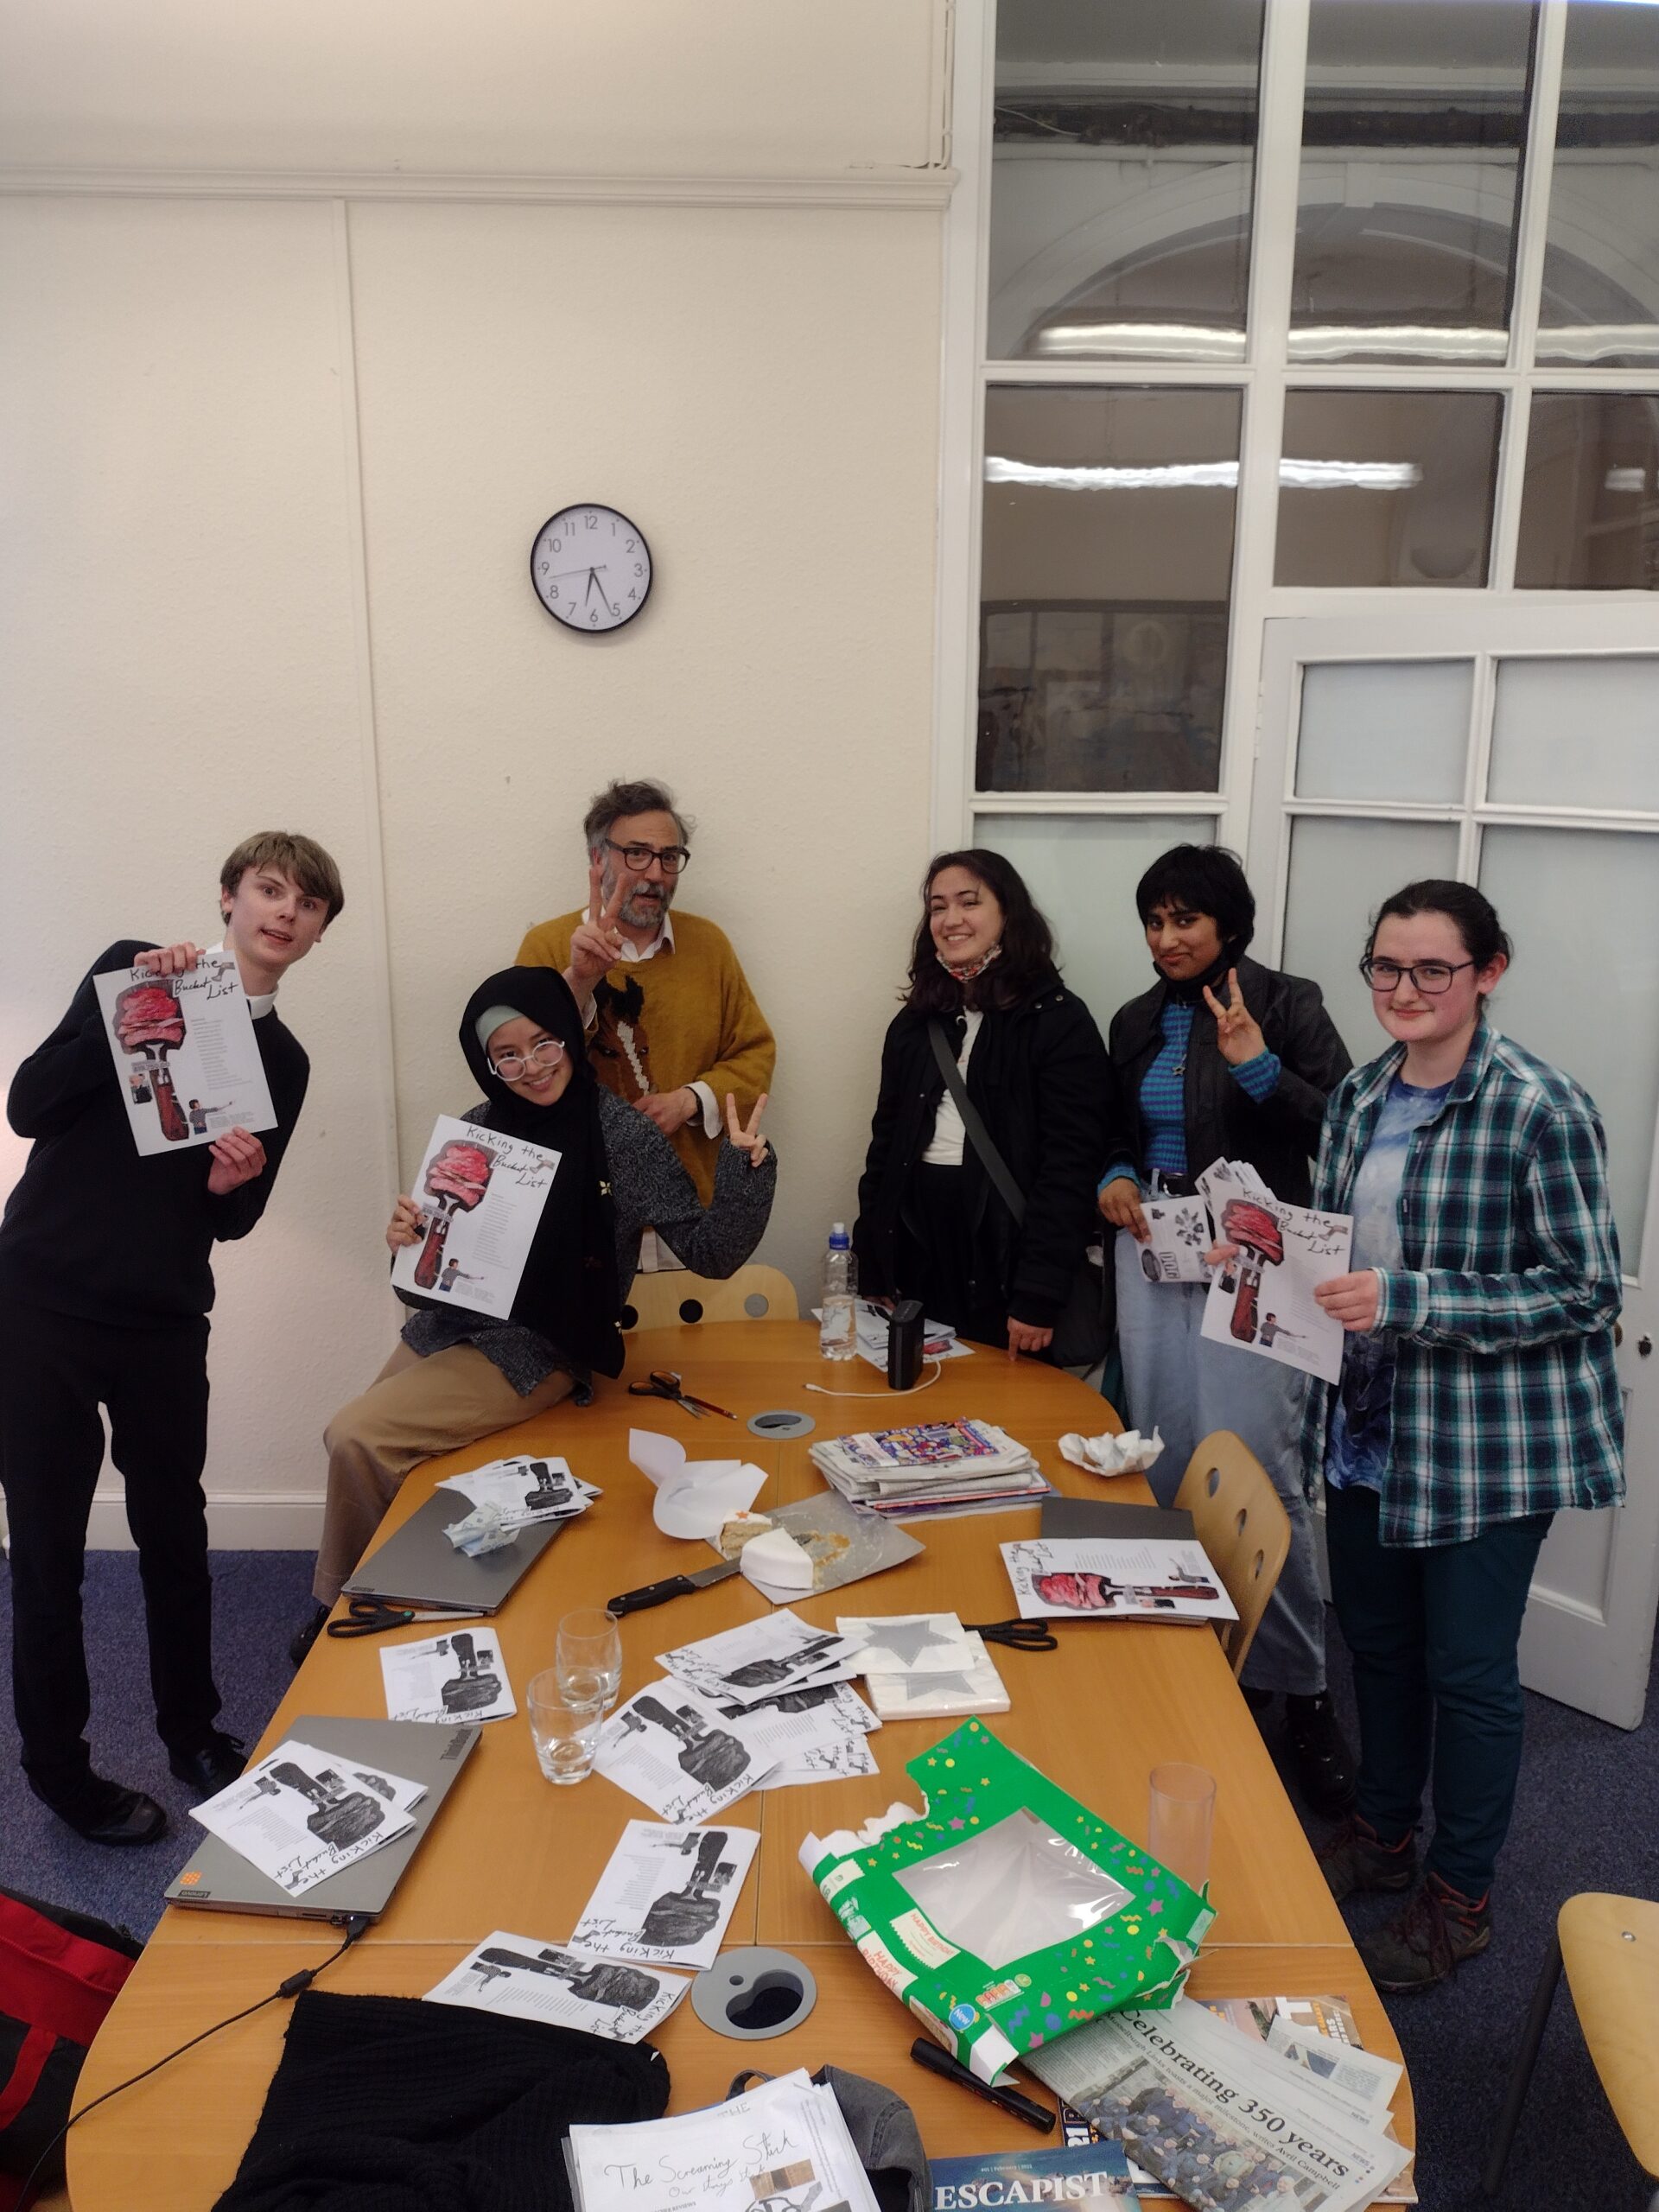 Ryan and the Collective posing with their zines